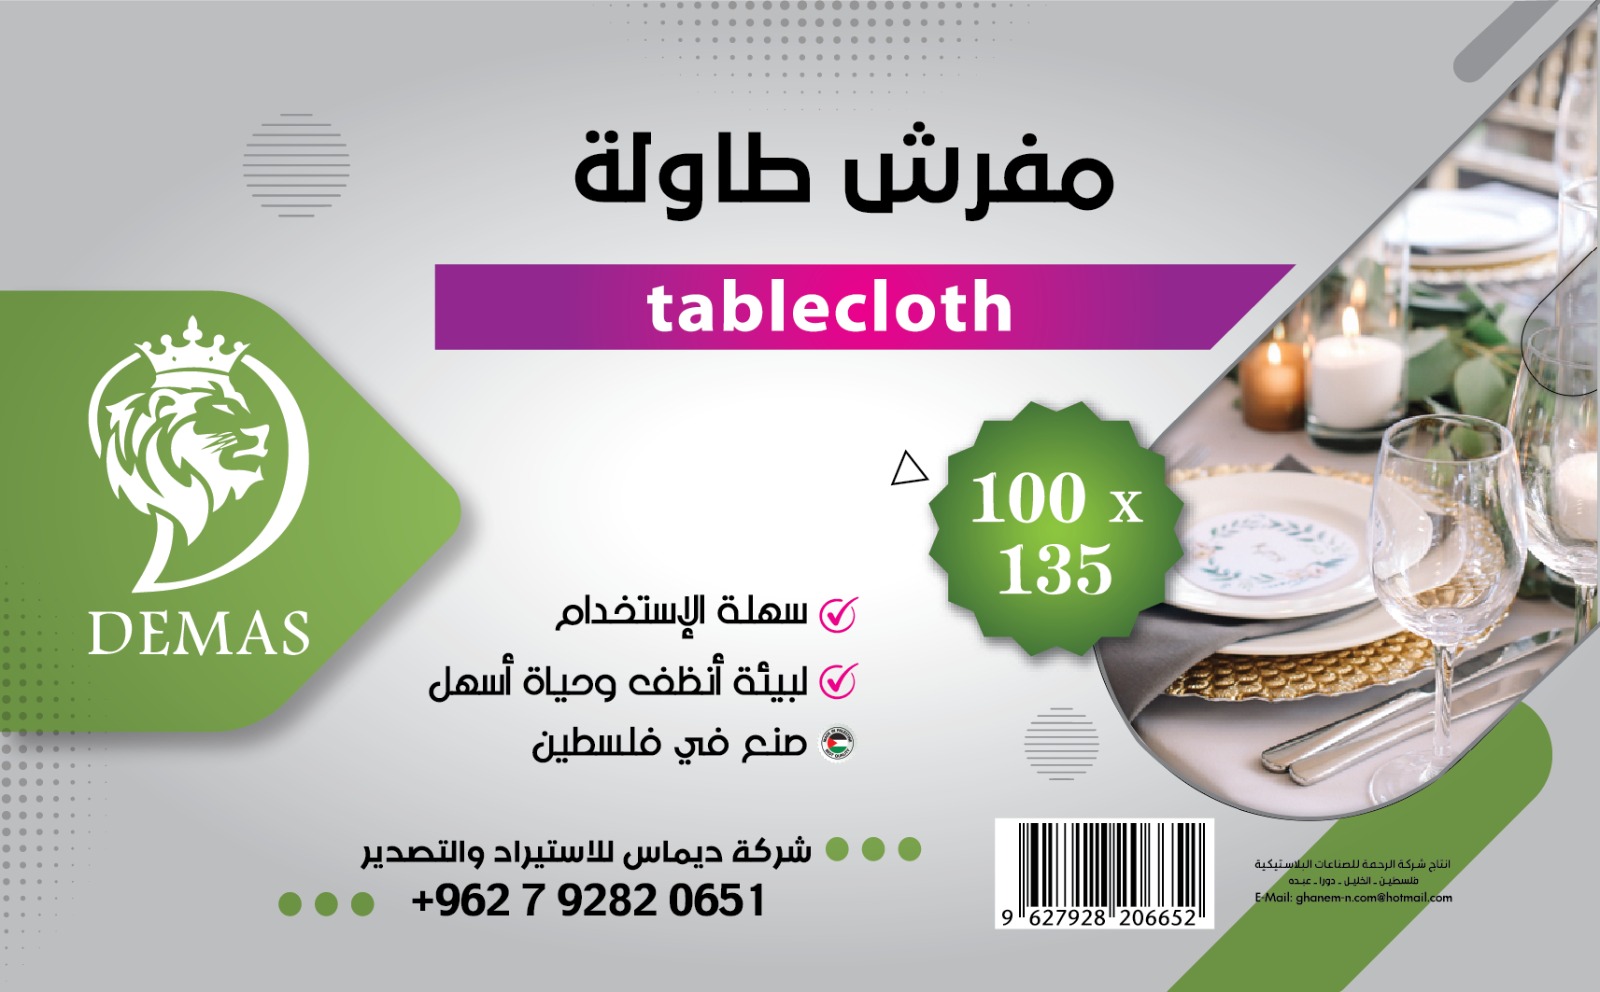 Plain colored tablecloth, 135 * 100 cm, 30 placemats from DEMAS